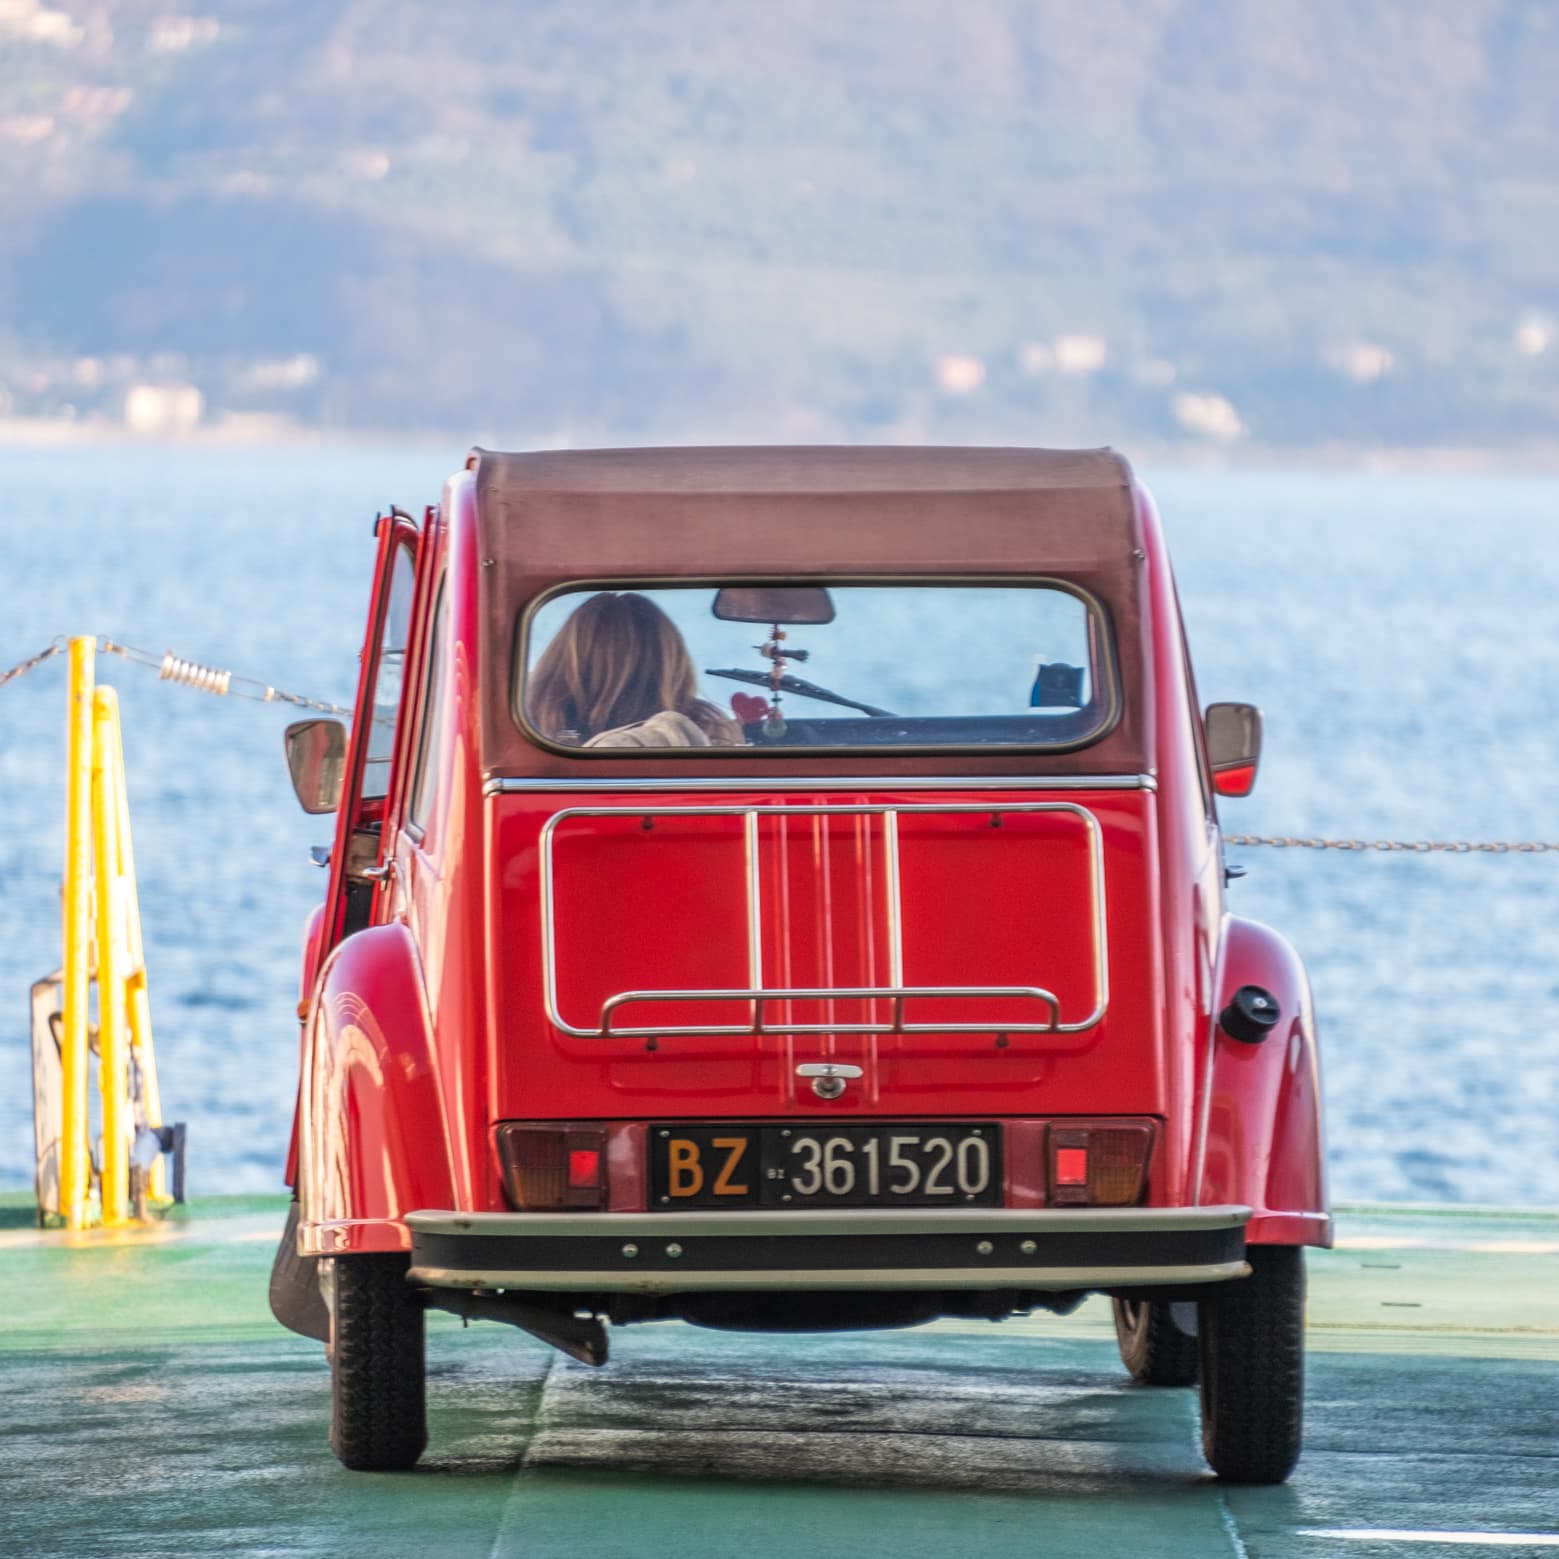 Classic vintage red car on a ferry on lake Garda, Italy